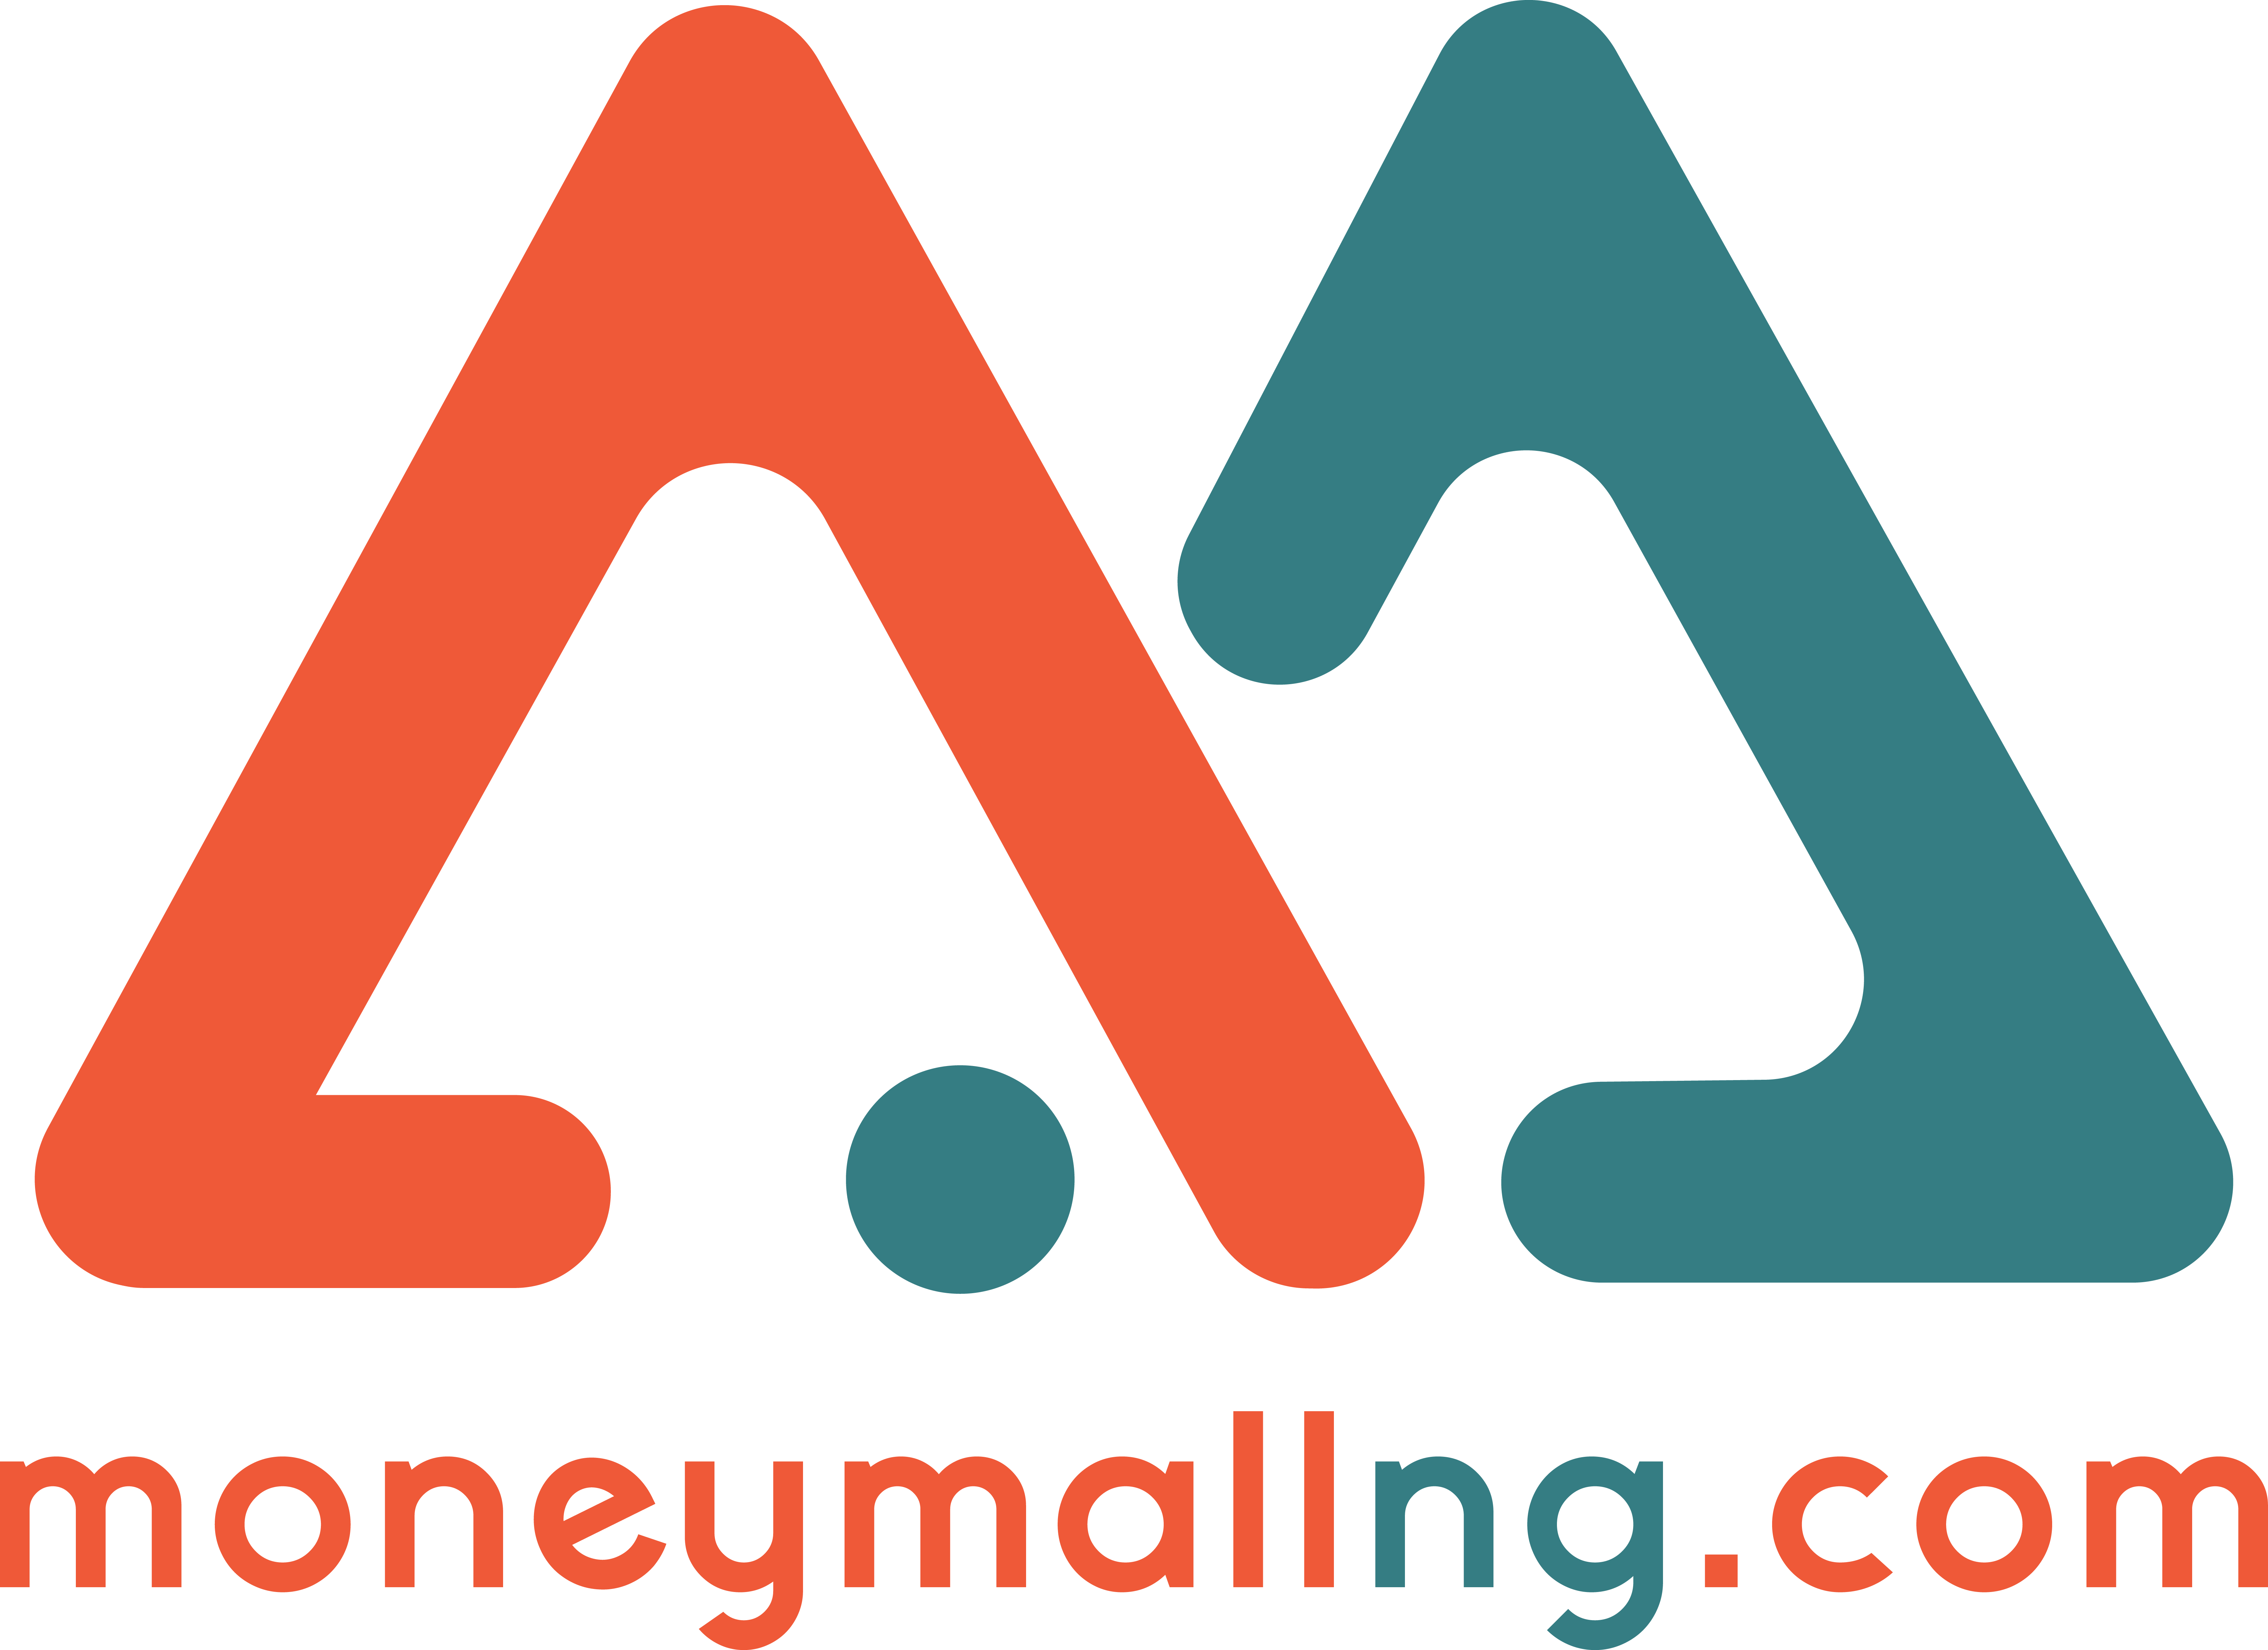 MoneyMall Loan Network - funding with ease